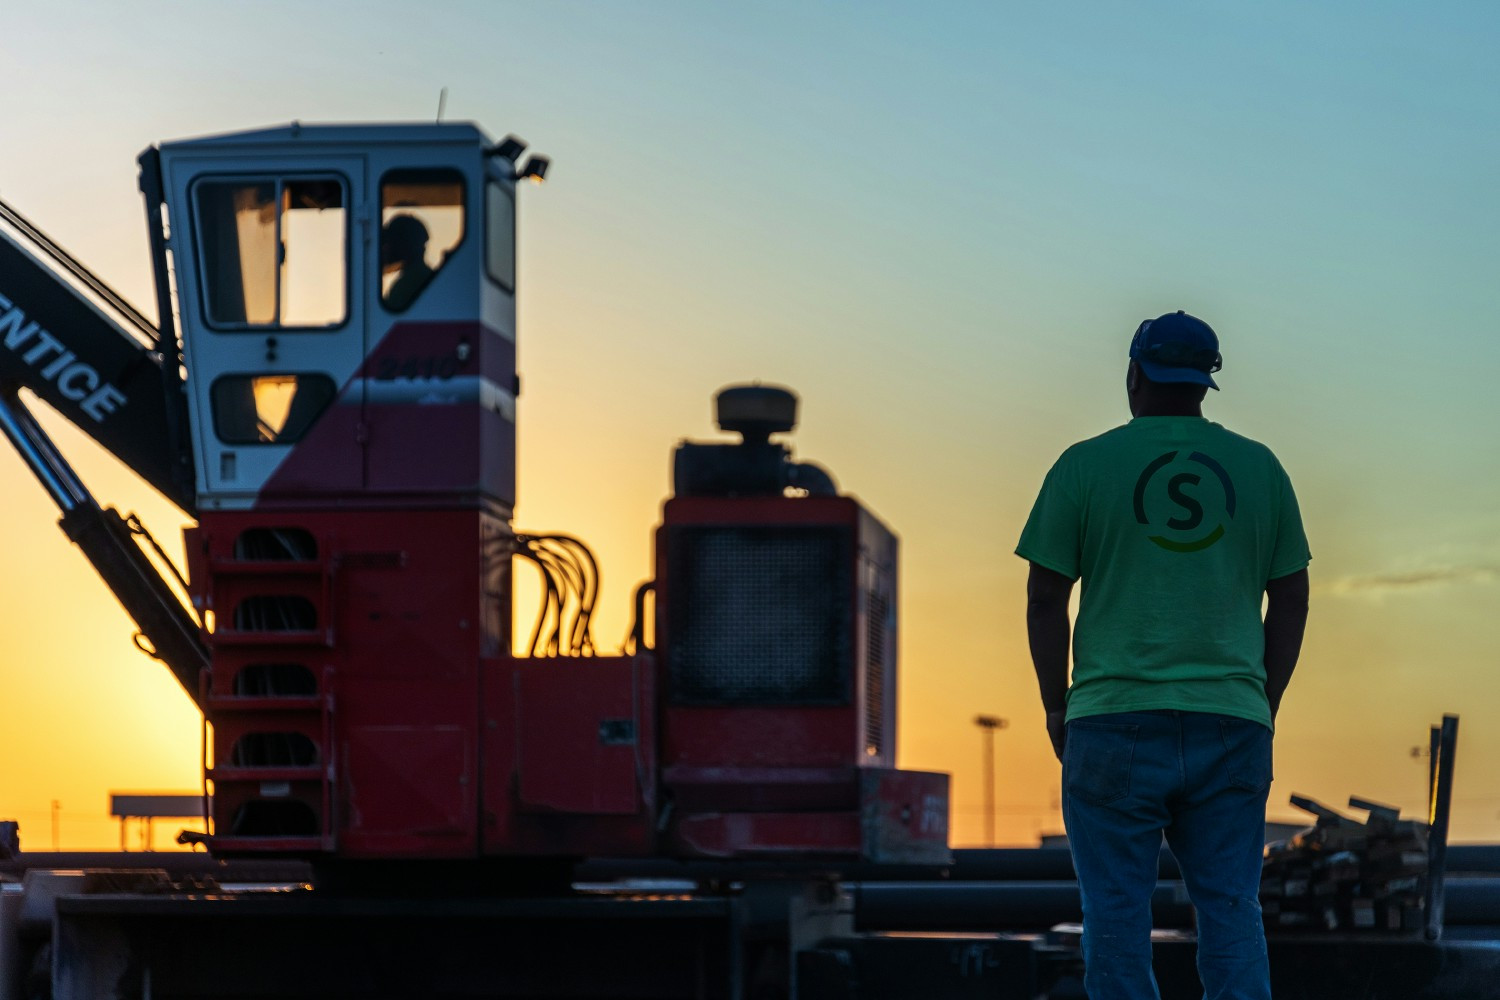 At sunset, a dedicated Sooner team member oversees the pipe yard. 